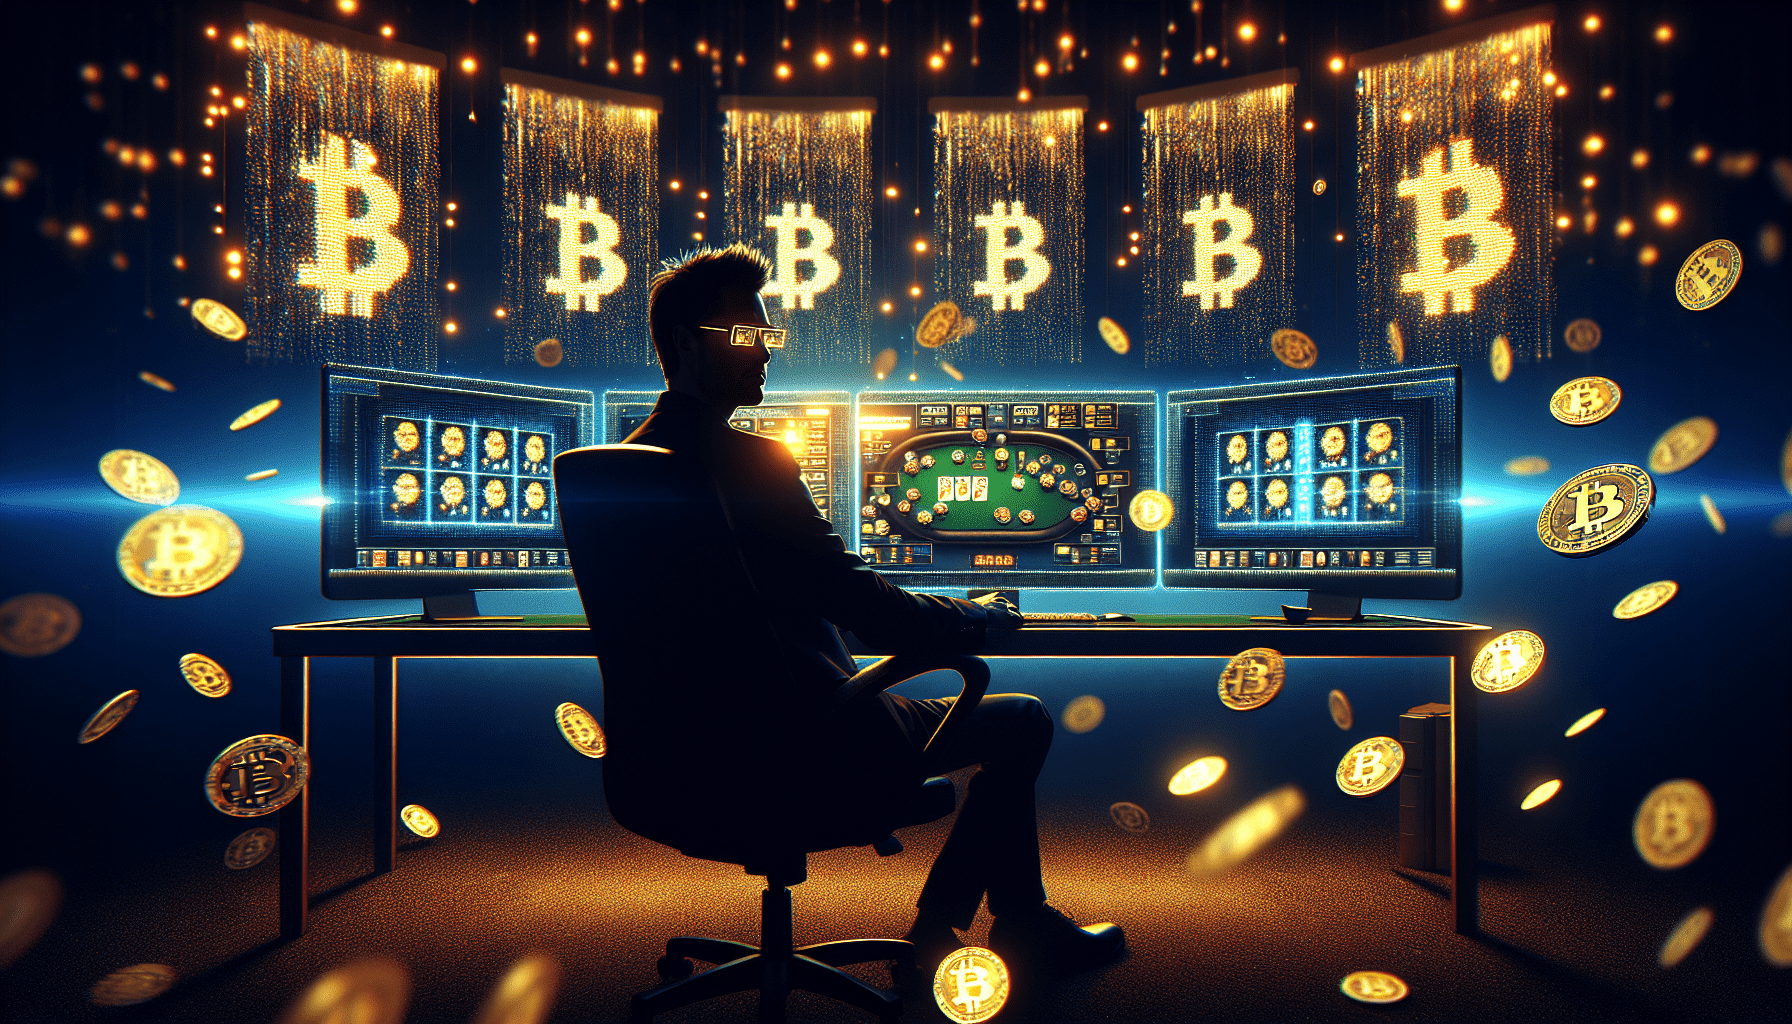 Can I Gamble Online With Bitcoin?